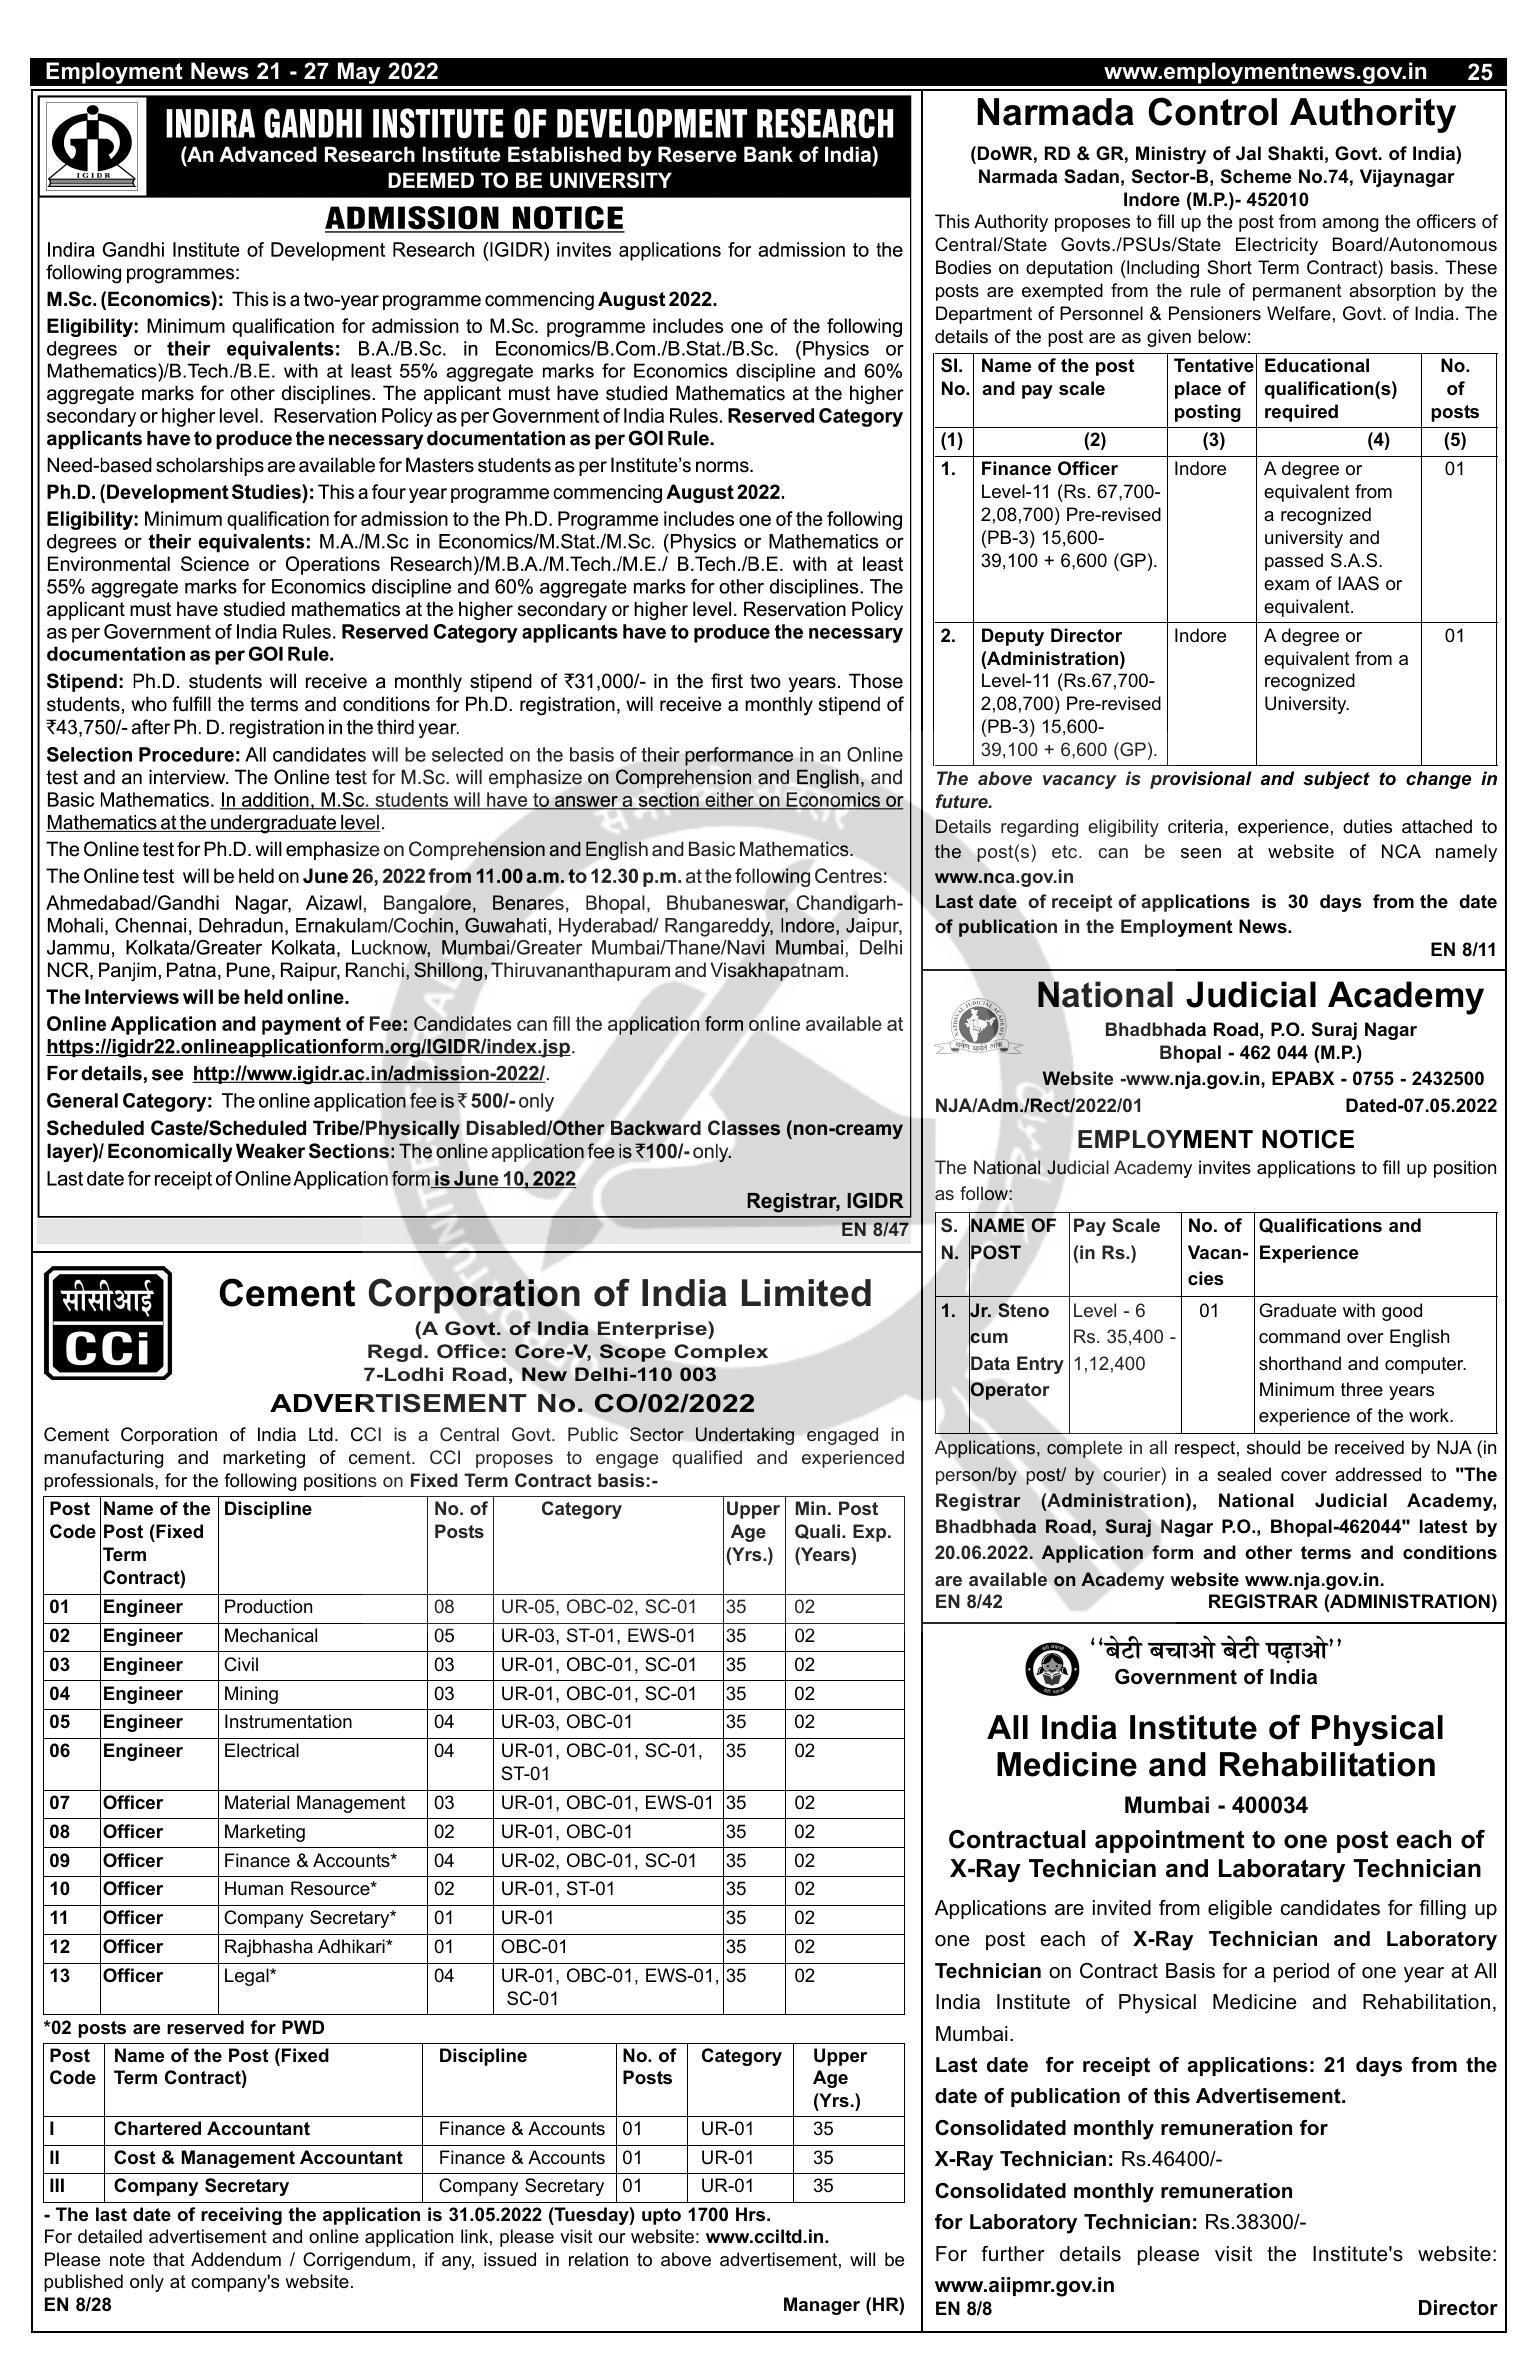 Narmada Control Authority (NCA) Finance Officer, Deputy Director Recruitment 2022 - Page 1